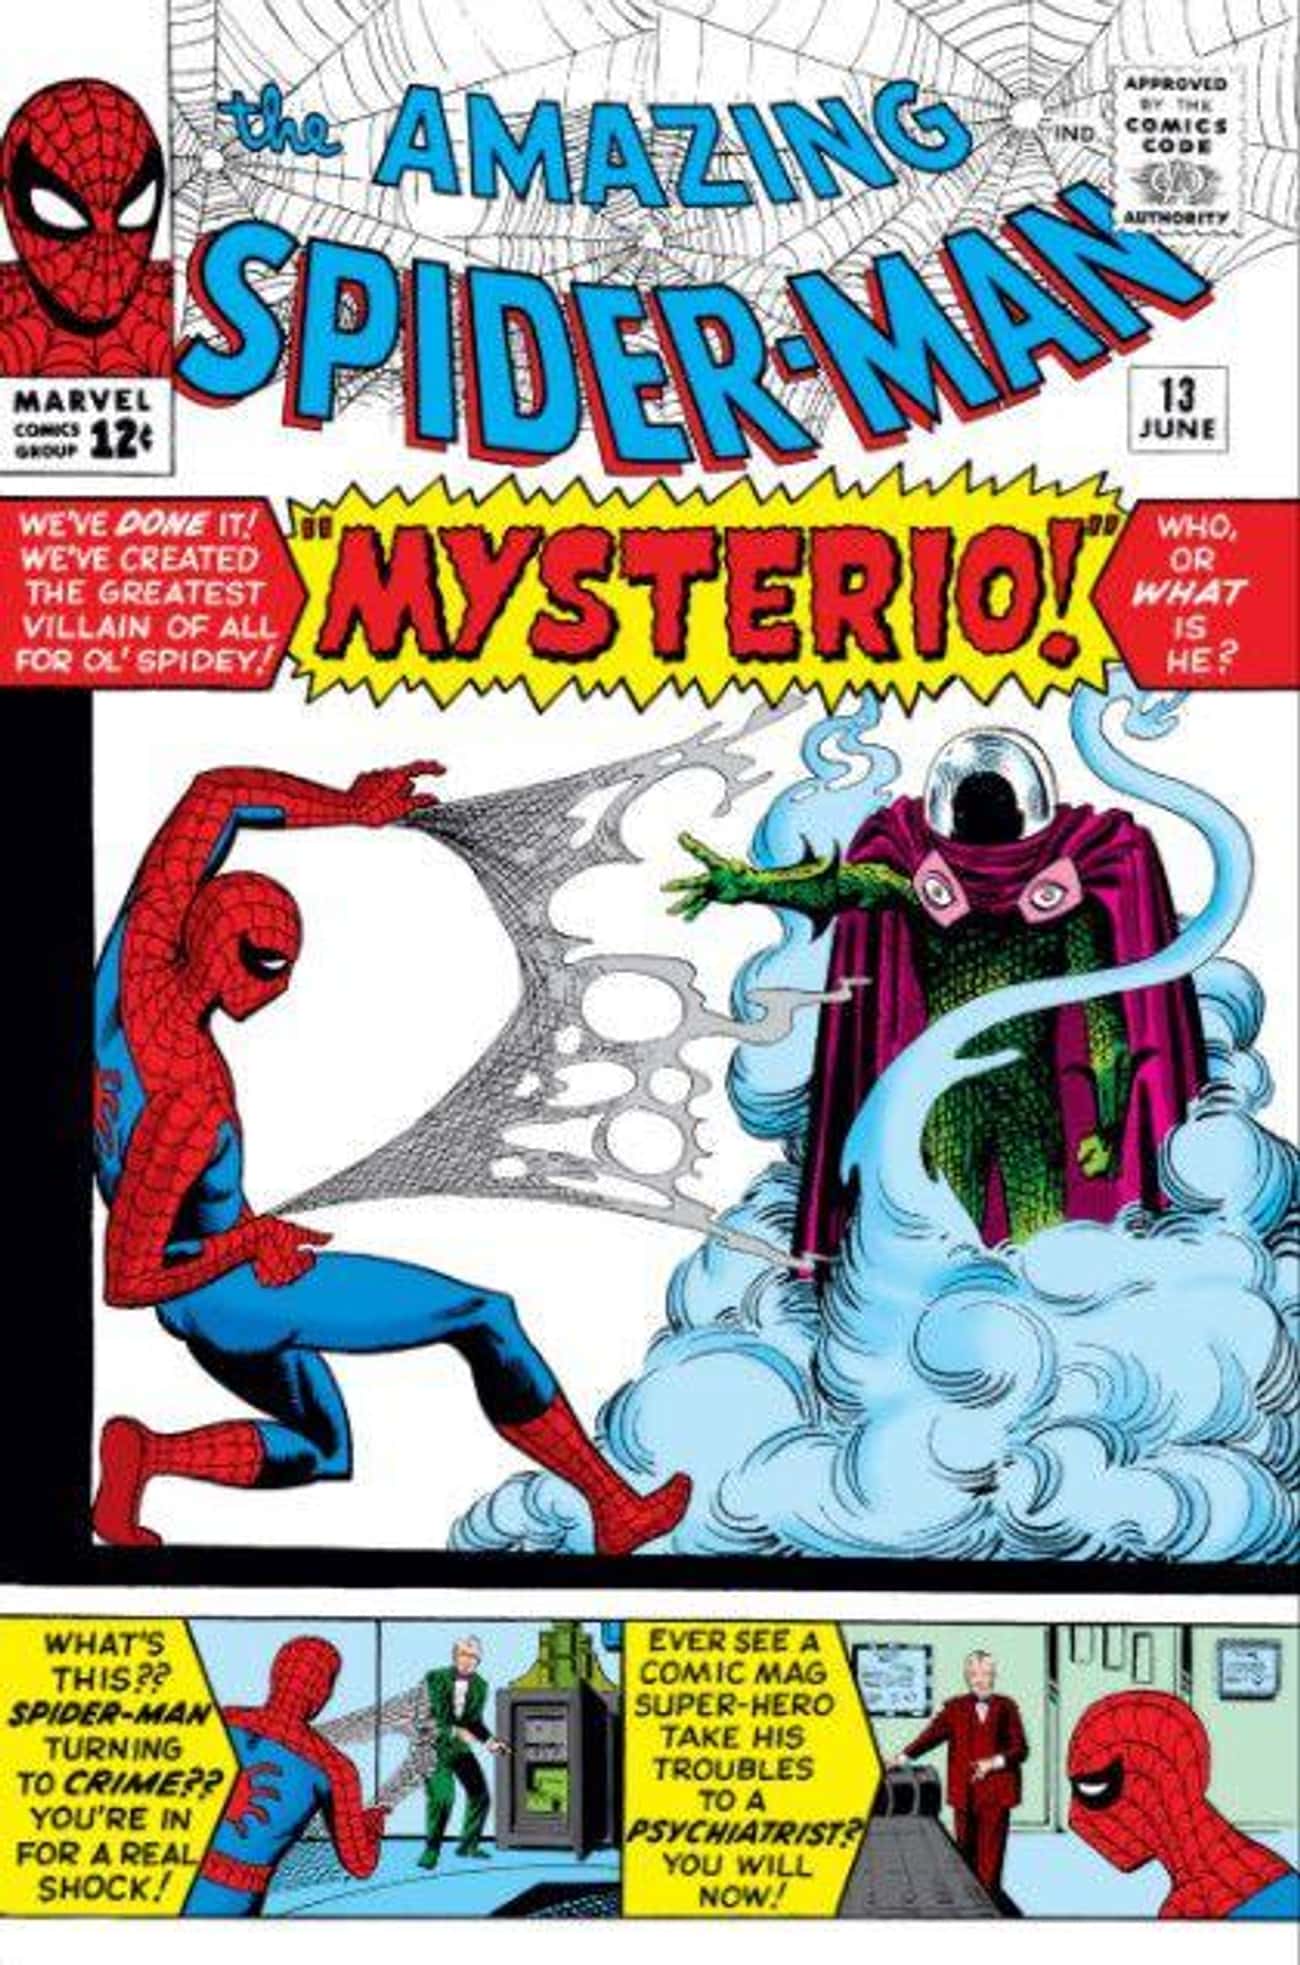 The Menace Of... Mysterio!